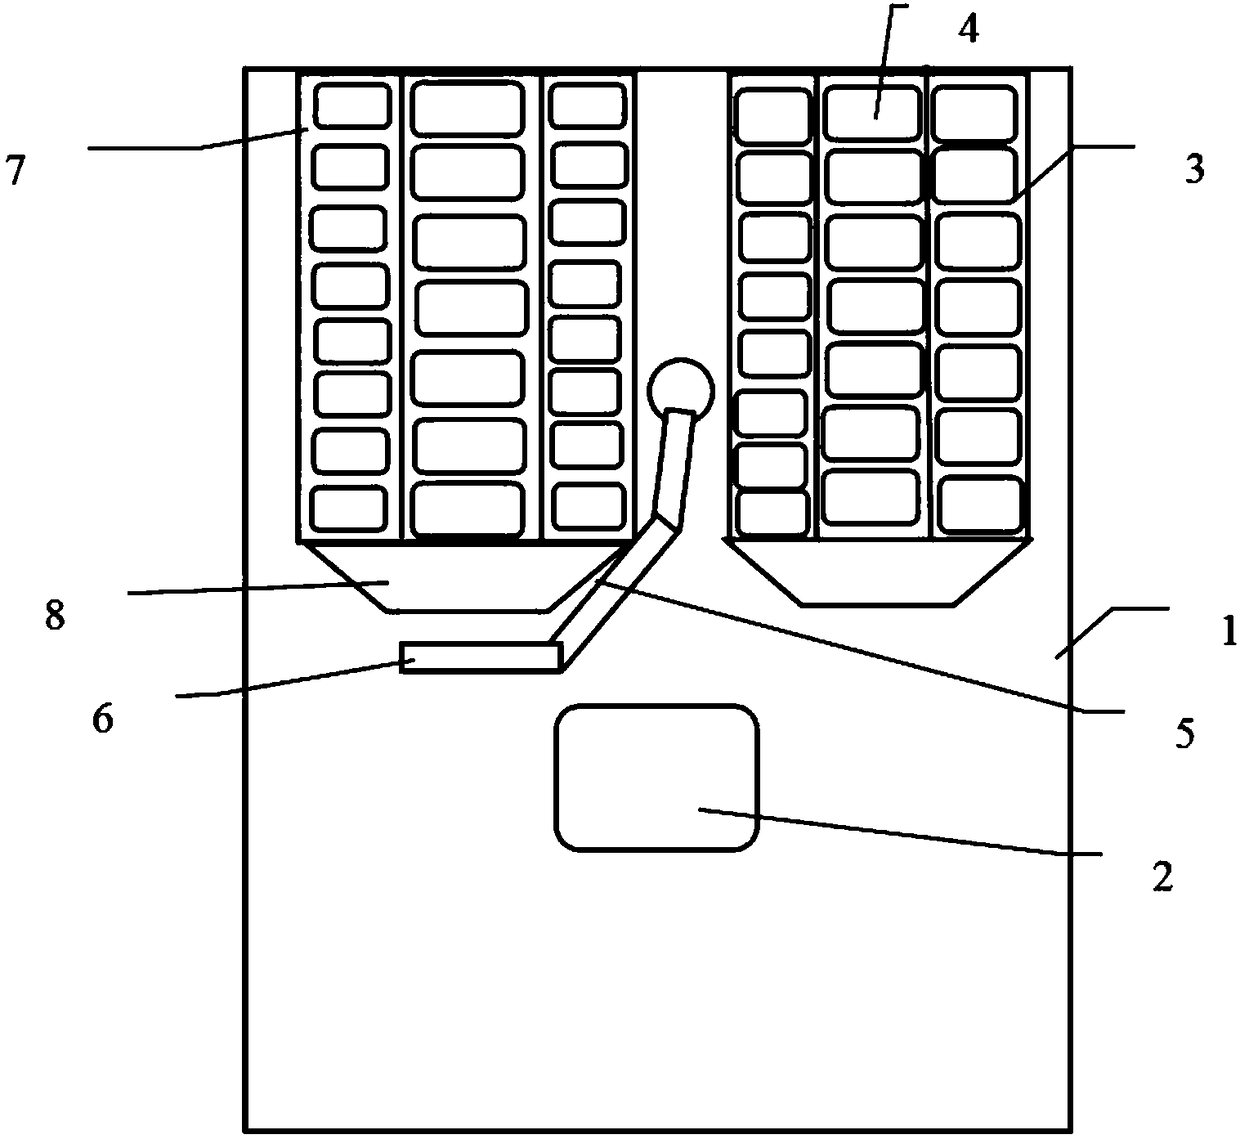 Reservation and vending system and method of use of unattended self-service fast food